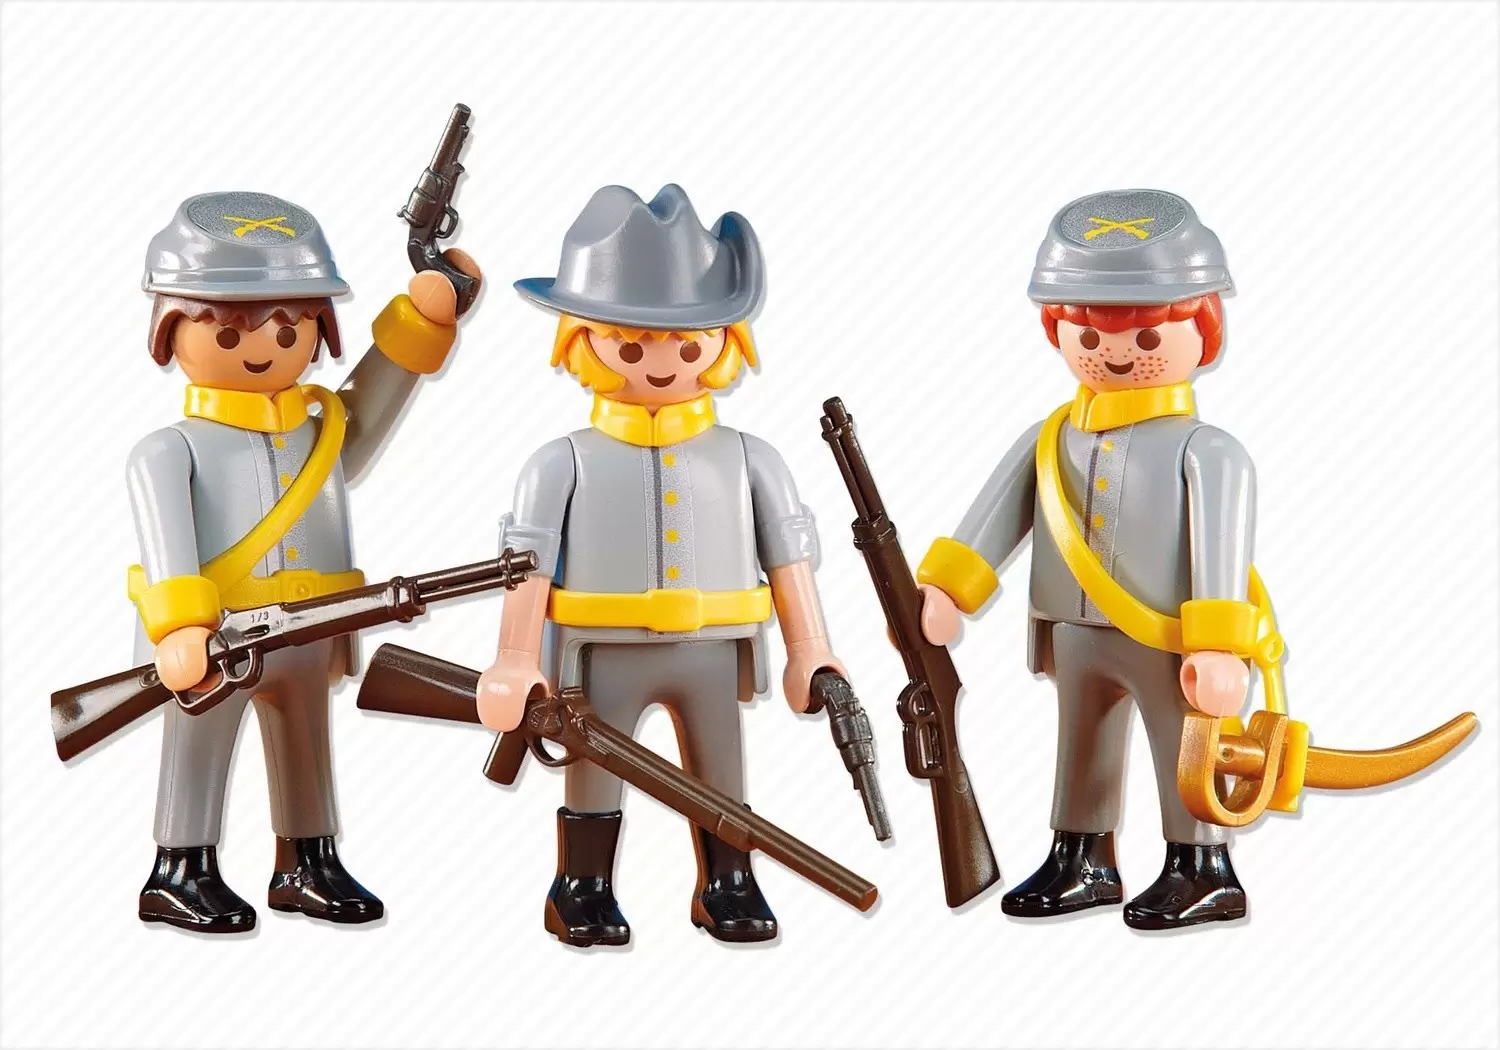 Playmobil western figure southern  soldiers 6276  NEW